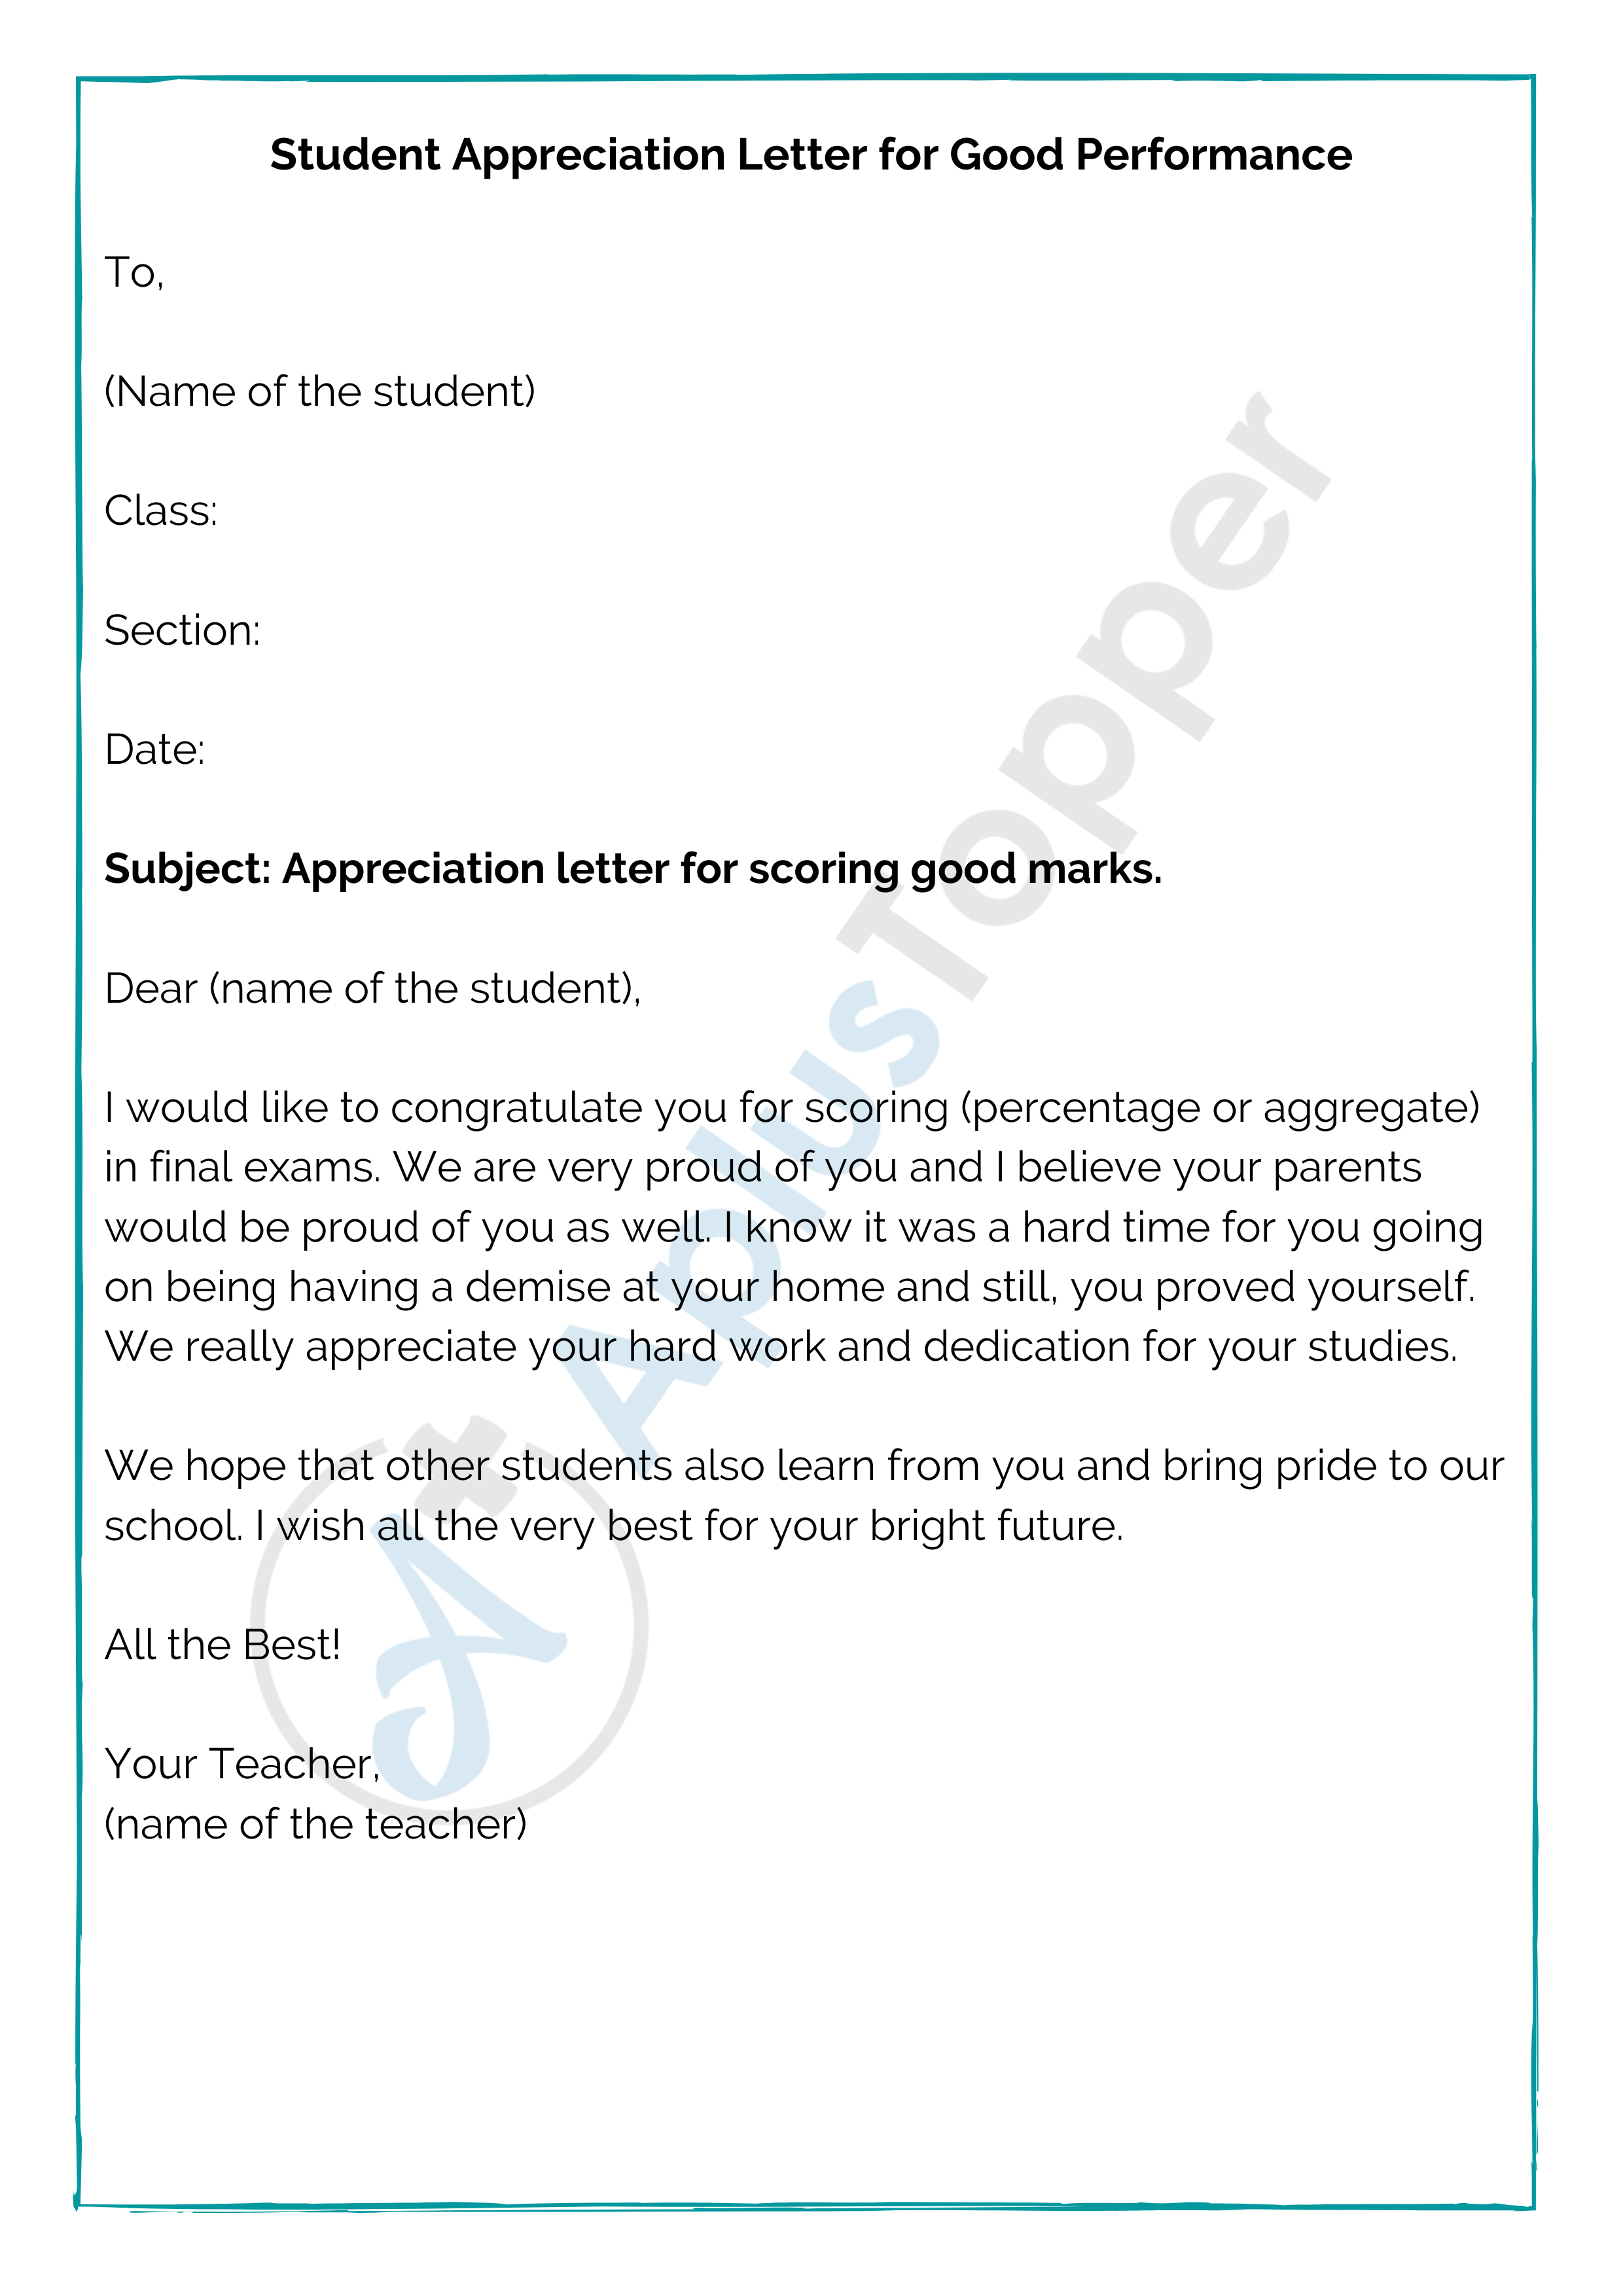 How To Write A Teacher Appreciation Letter - More images for how to ...